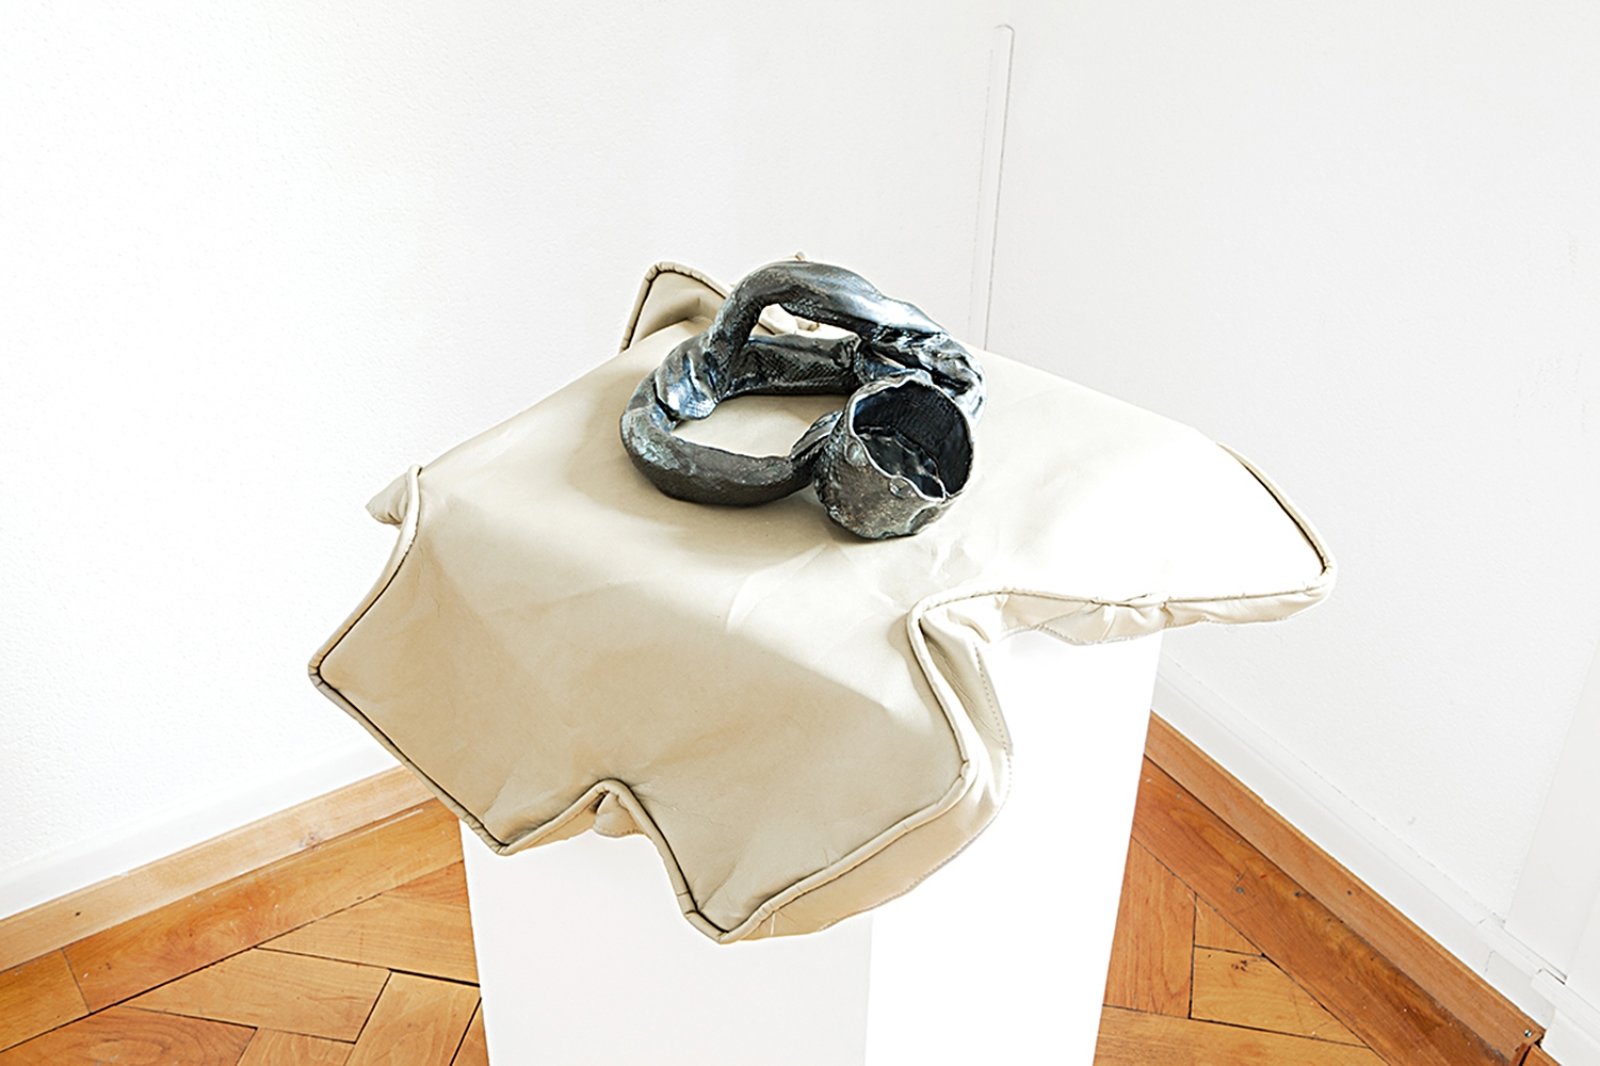 Rochelle Goldberg, I See You P!, 2014, glazed ceramic and cushion, dimensions variable